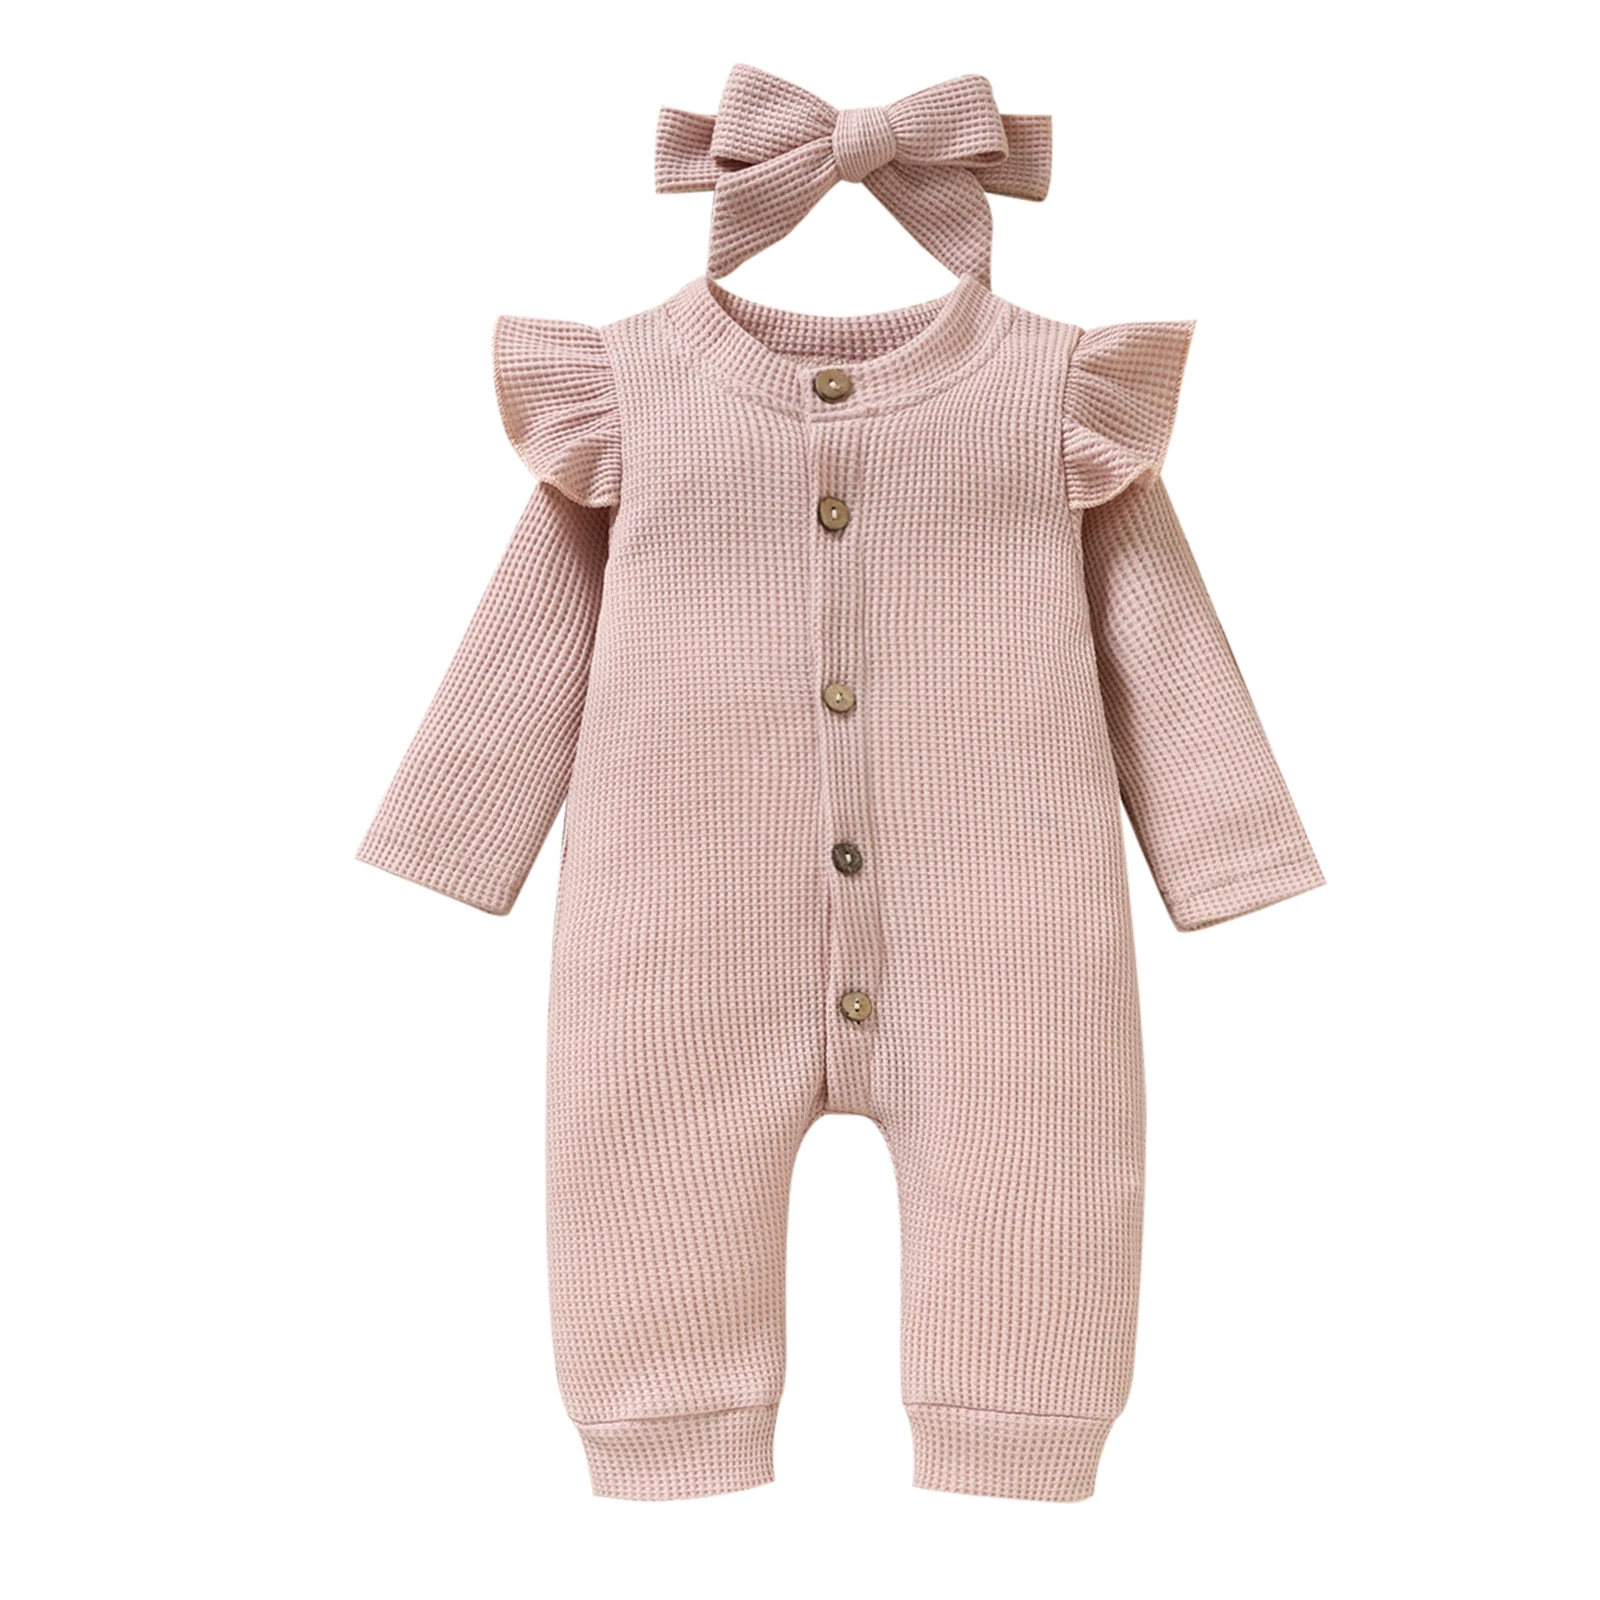 Cotton baby suit Infant Baby Girls Jumpsuit with Headband, Long Sleeve Button Closure Jumpsuit with Bowknot Hairband bulk baby bodysuits	 Baby Rompers